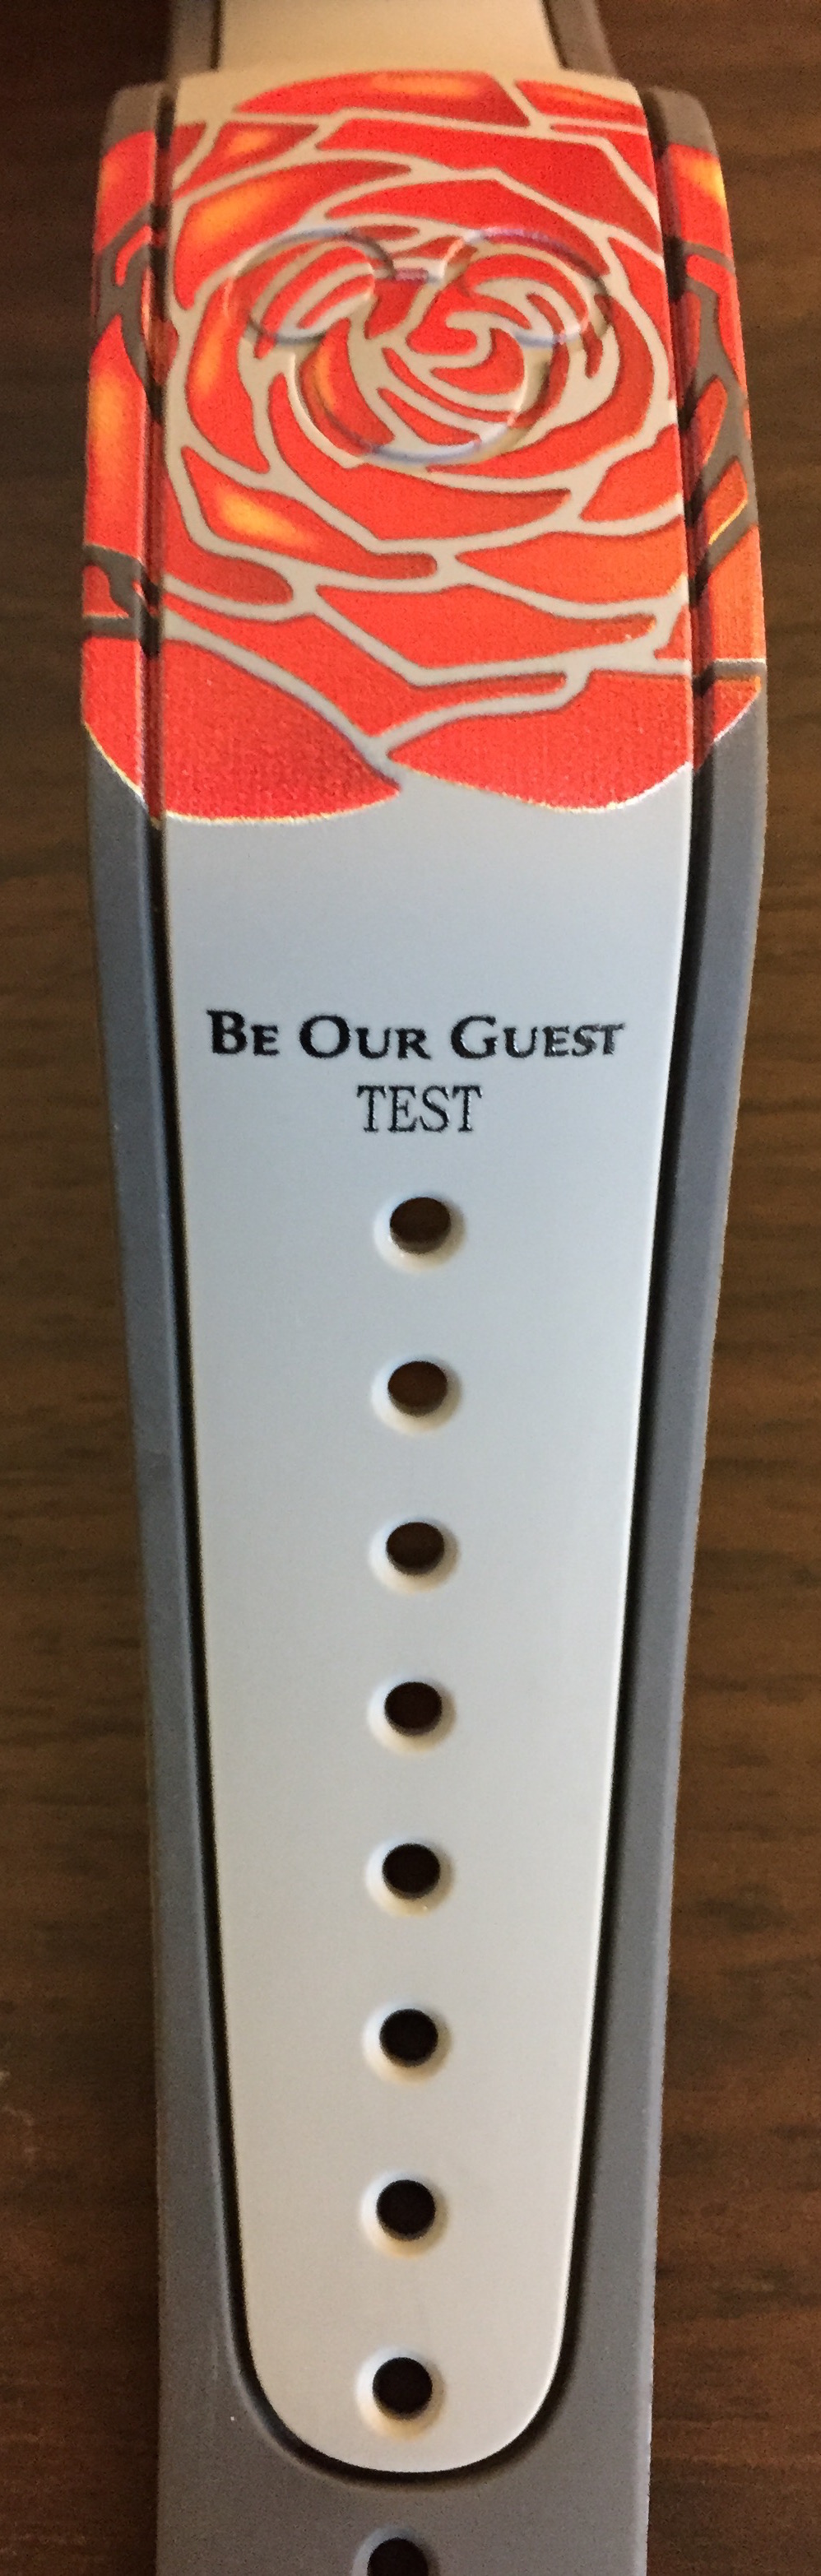 be_our_guest_1